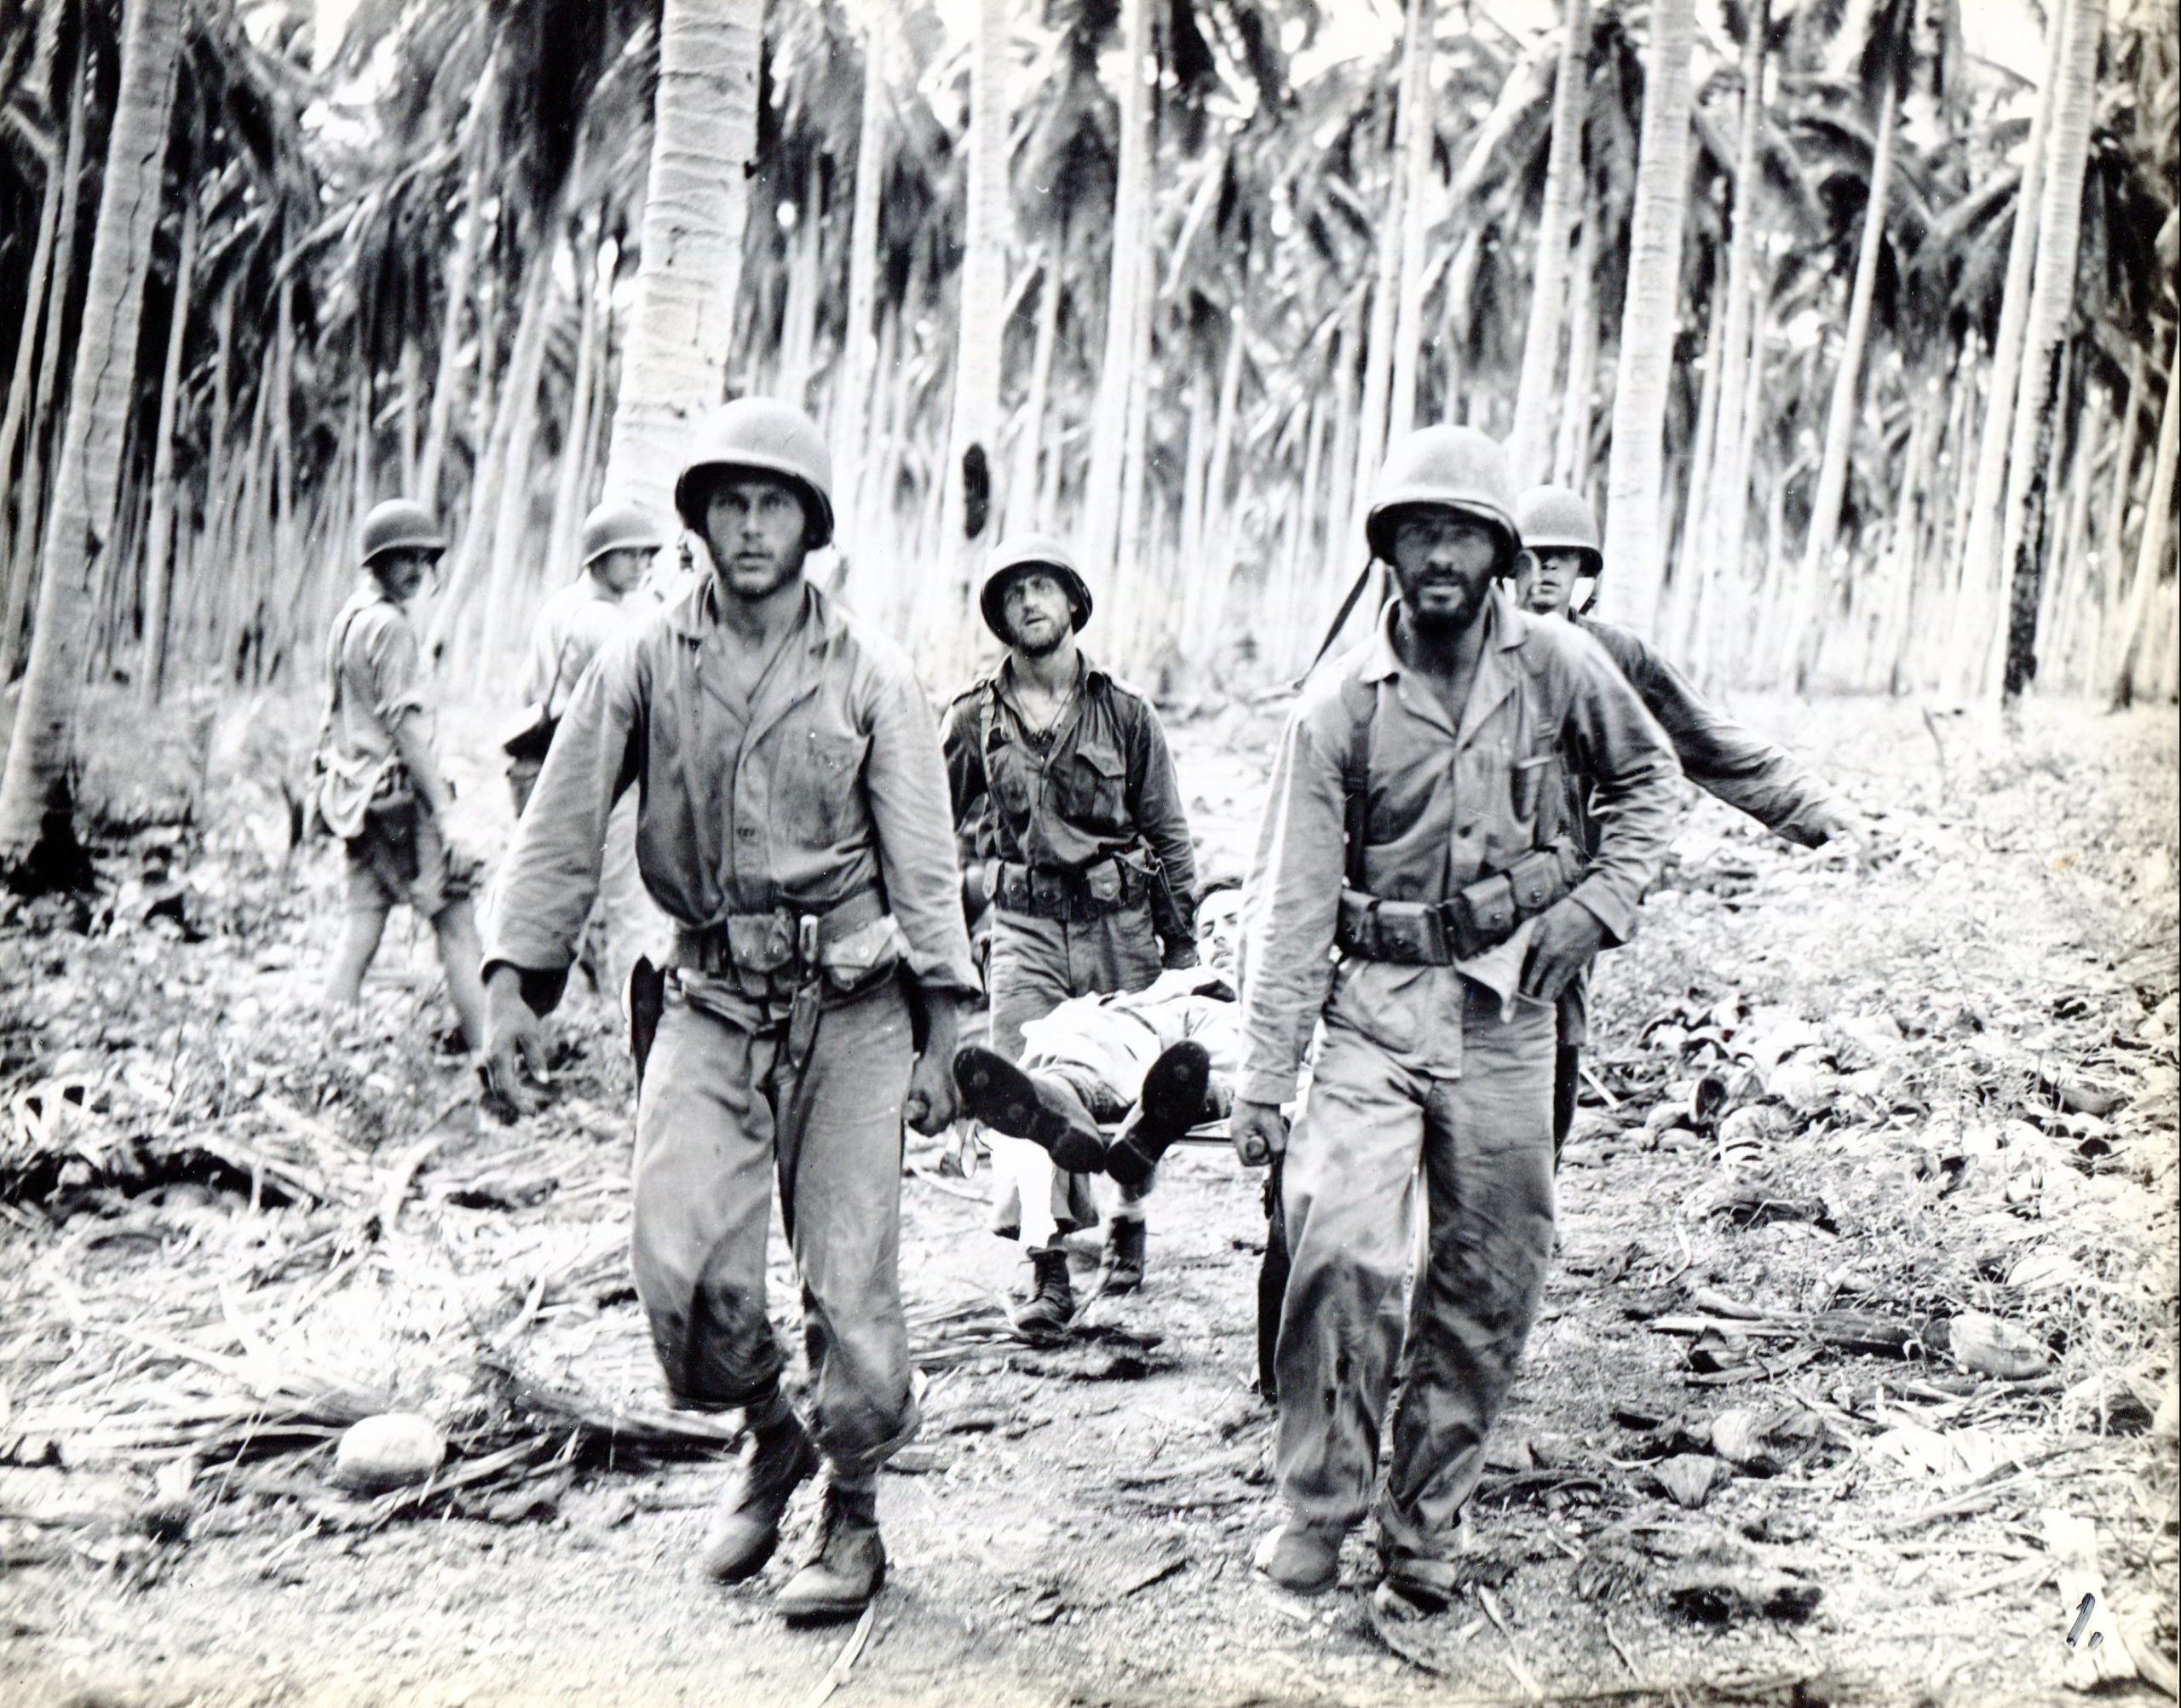 https://missingmarines.com/wp-content/uploads/2018/06/guadalcanal_carry_wounded-scaled.jpg